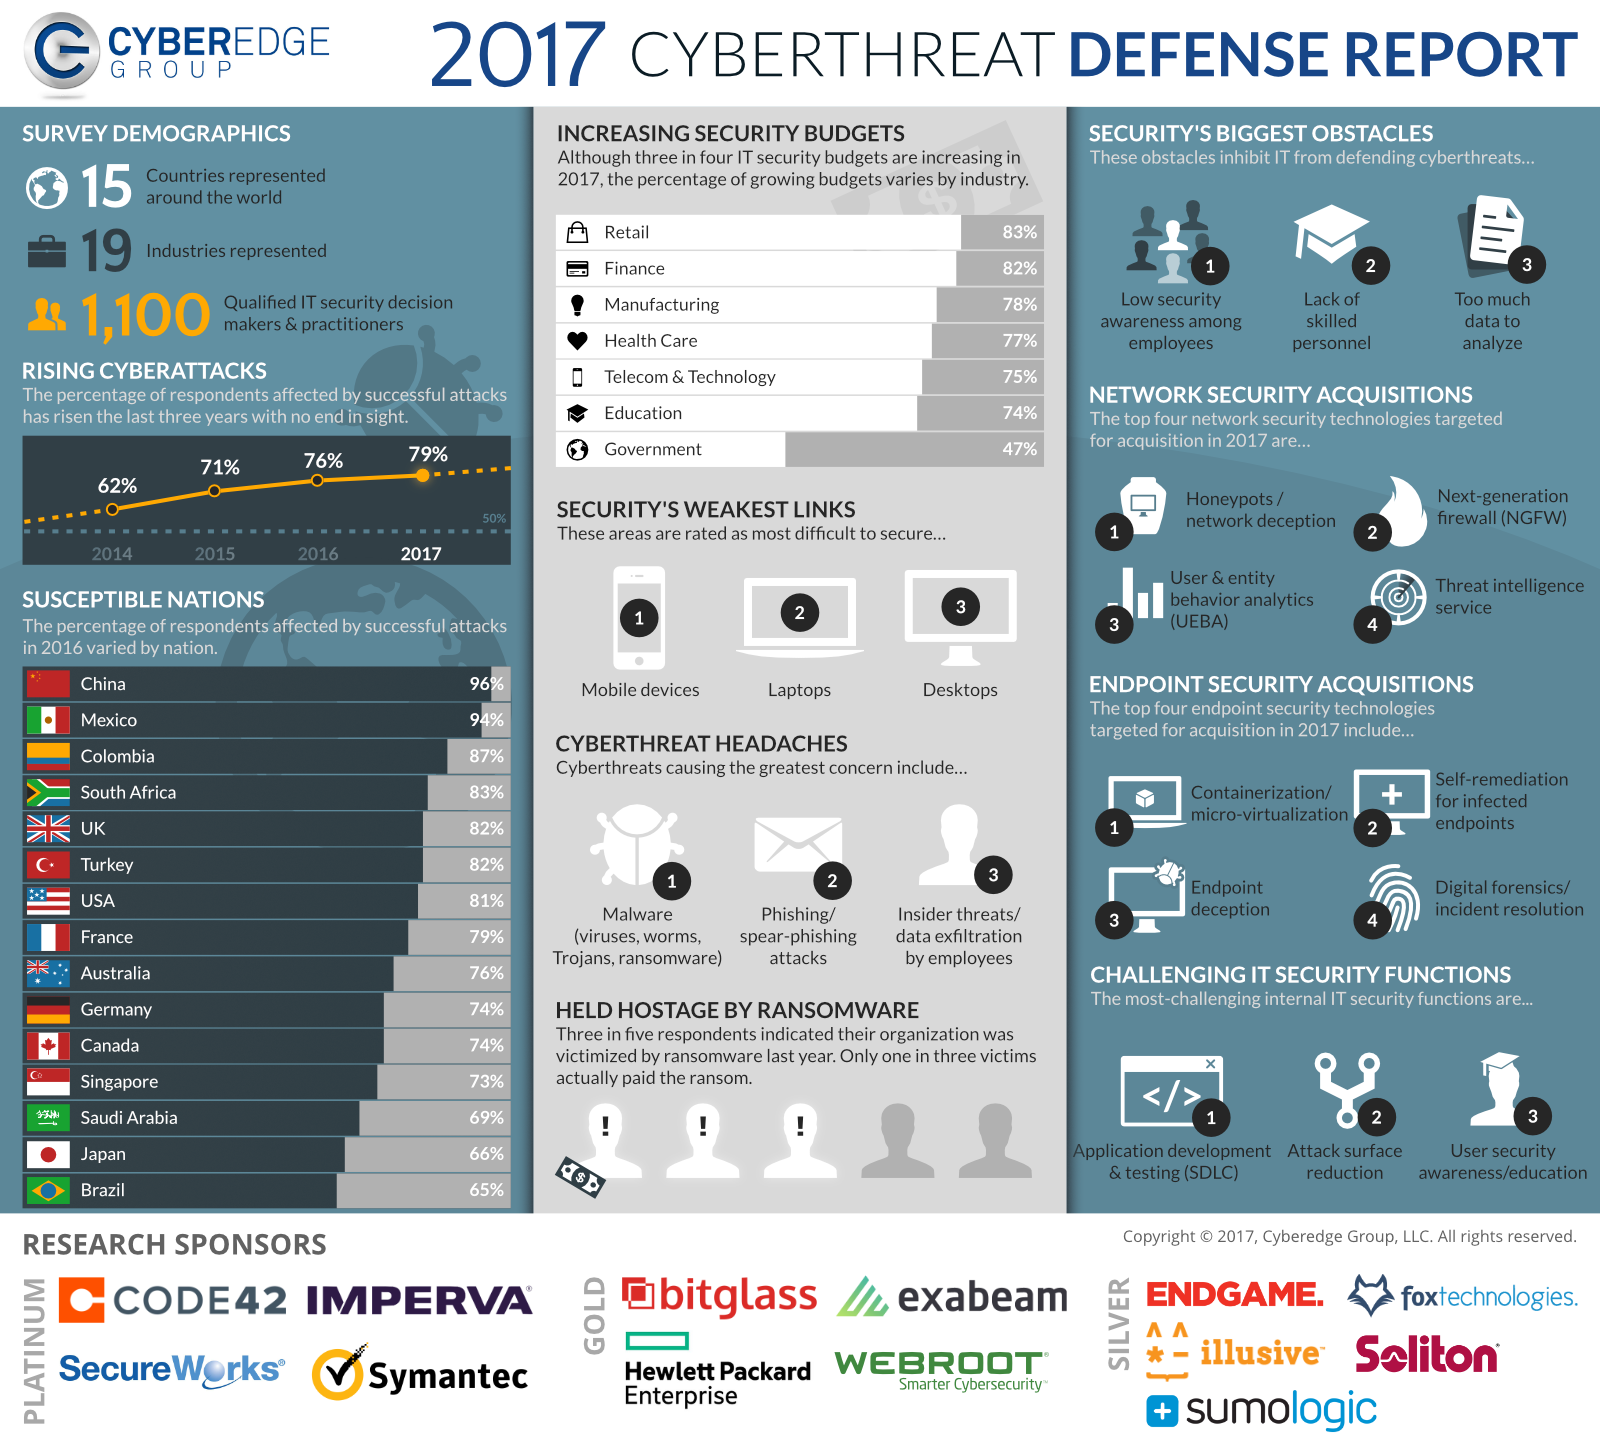 Presentation image for CyberEdge 2017 Cyberthreat Defense Report Infographic